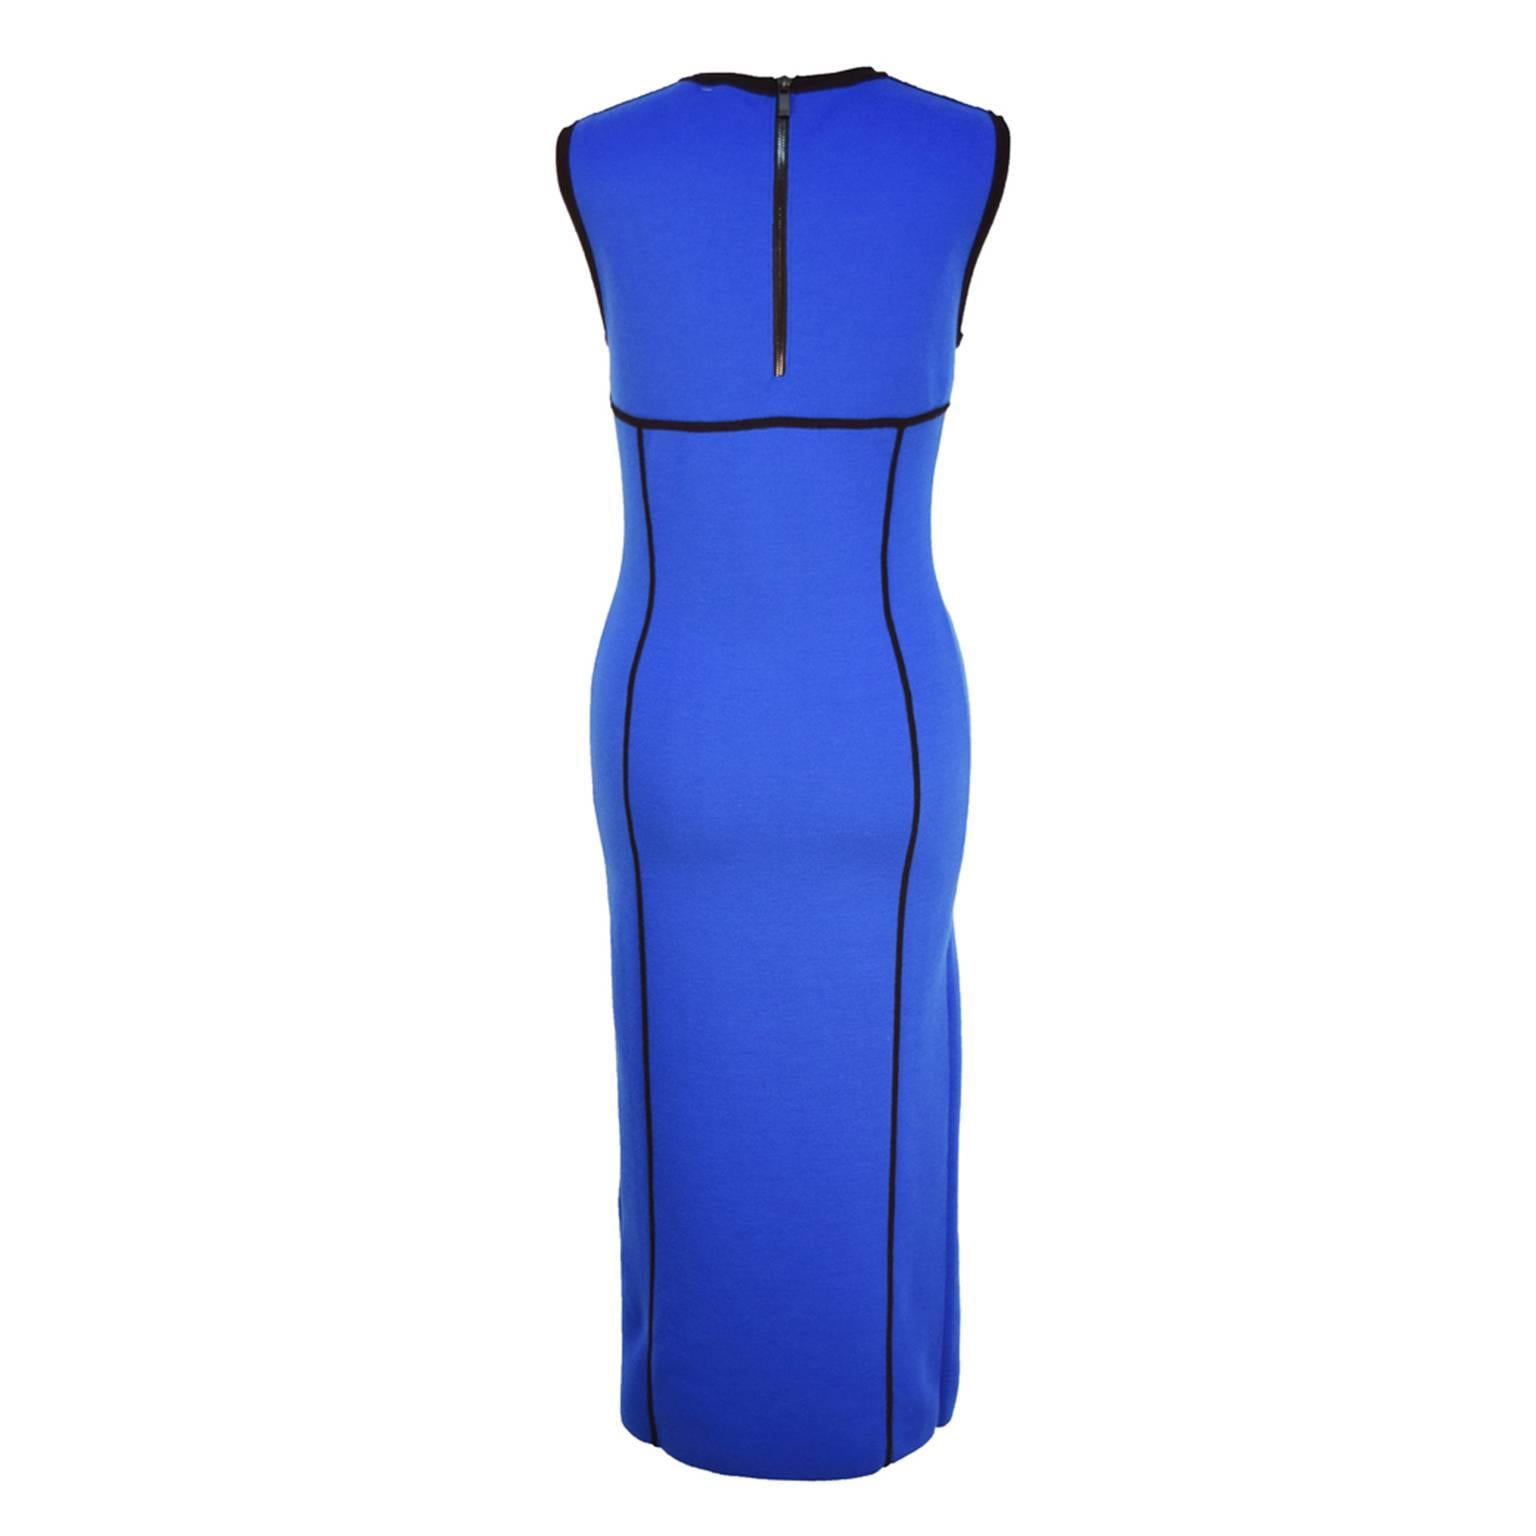 This sleek and sexy Michael Kors Body Con Midi Dress hits right at under the knee, and is made of wool, nylon, and elastic knit for comfort. Comes in a royal blue and has black contrasting lining for a sophisticated look. 